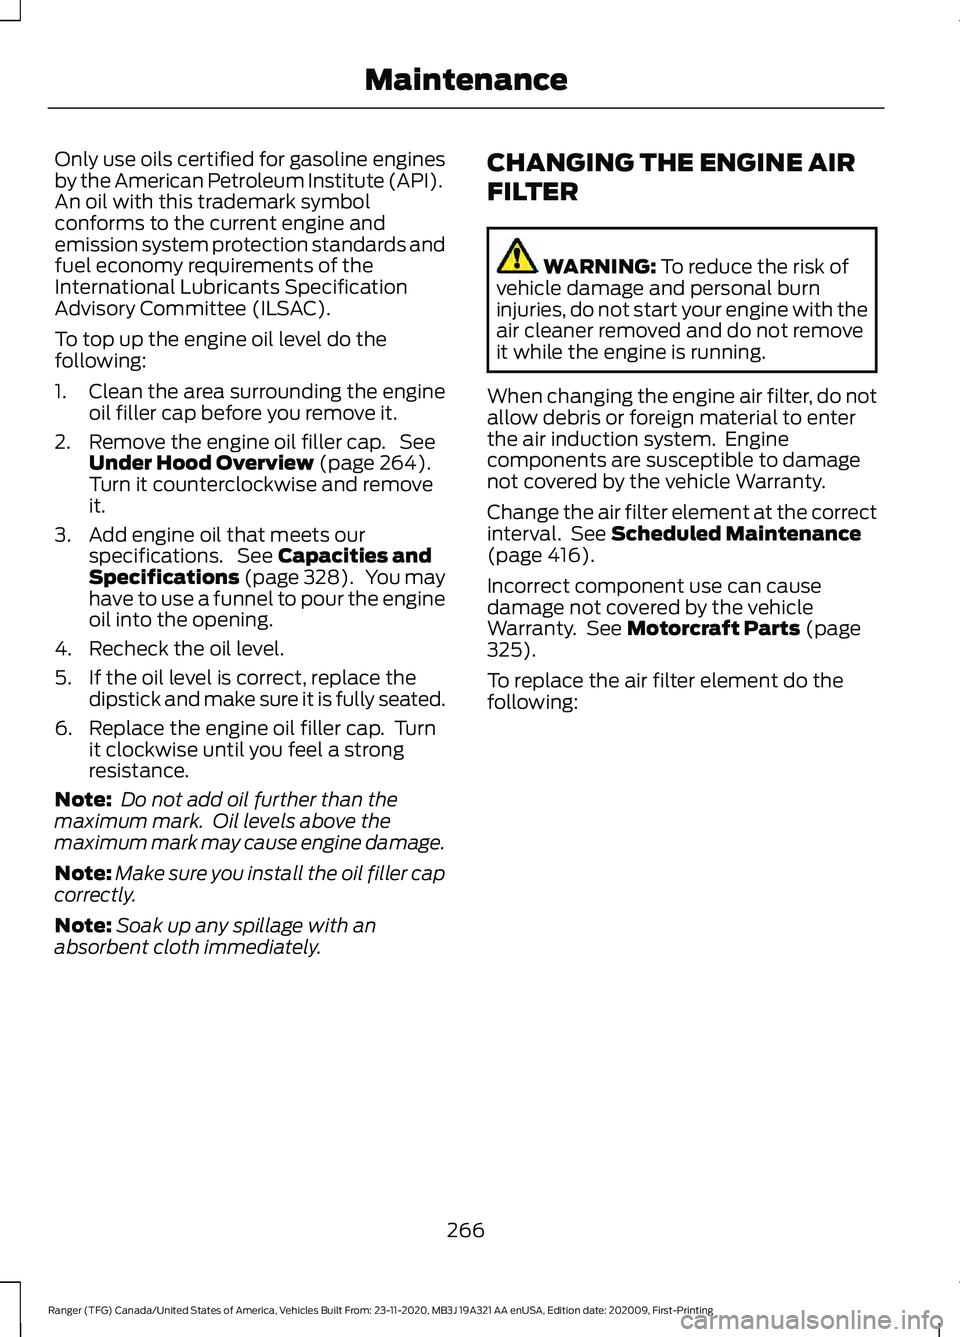 FORD RANGER 2021  Owners Manual Only use oils certified for gasoline engines
by the American Petroleum Institute (API).
An oil with this trademark symbol
conforms to the current engine and
emission system protection standards and
fu